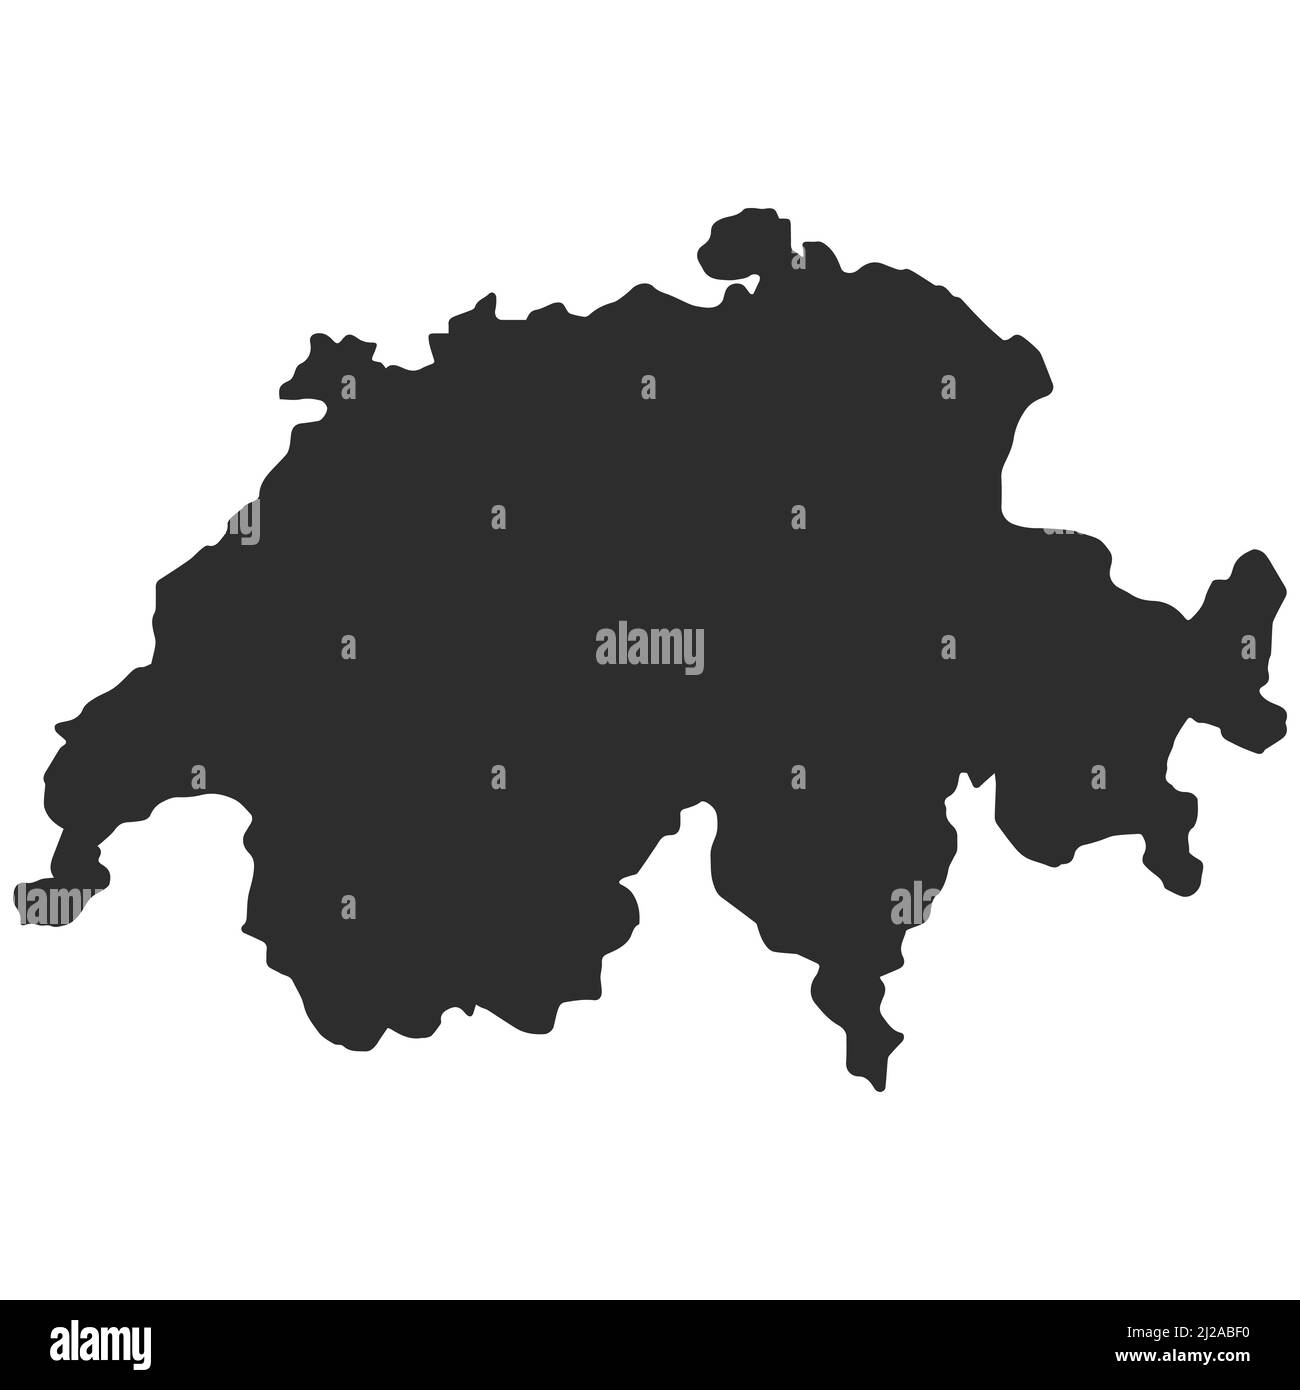 Switzerland country outline dark silhouette map, national borders, country shape Stock Vector